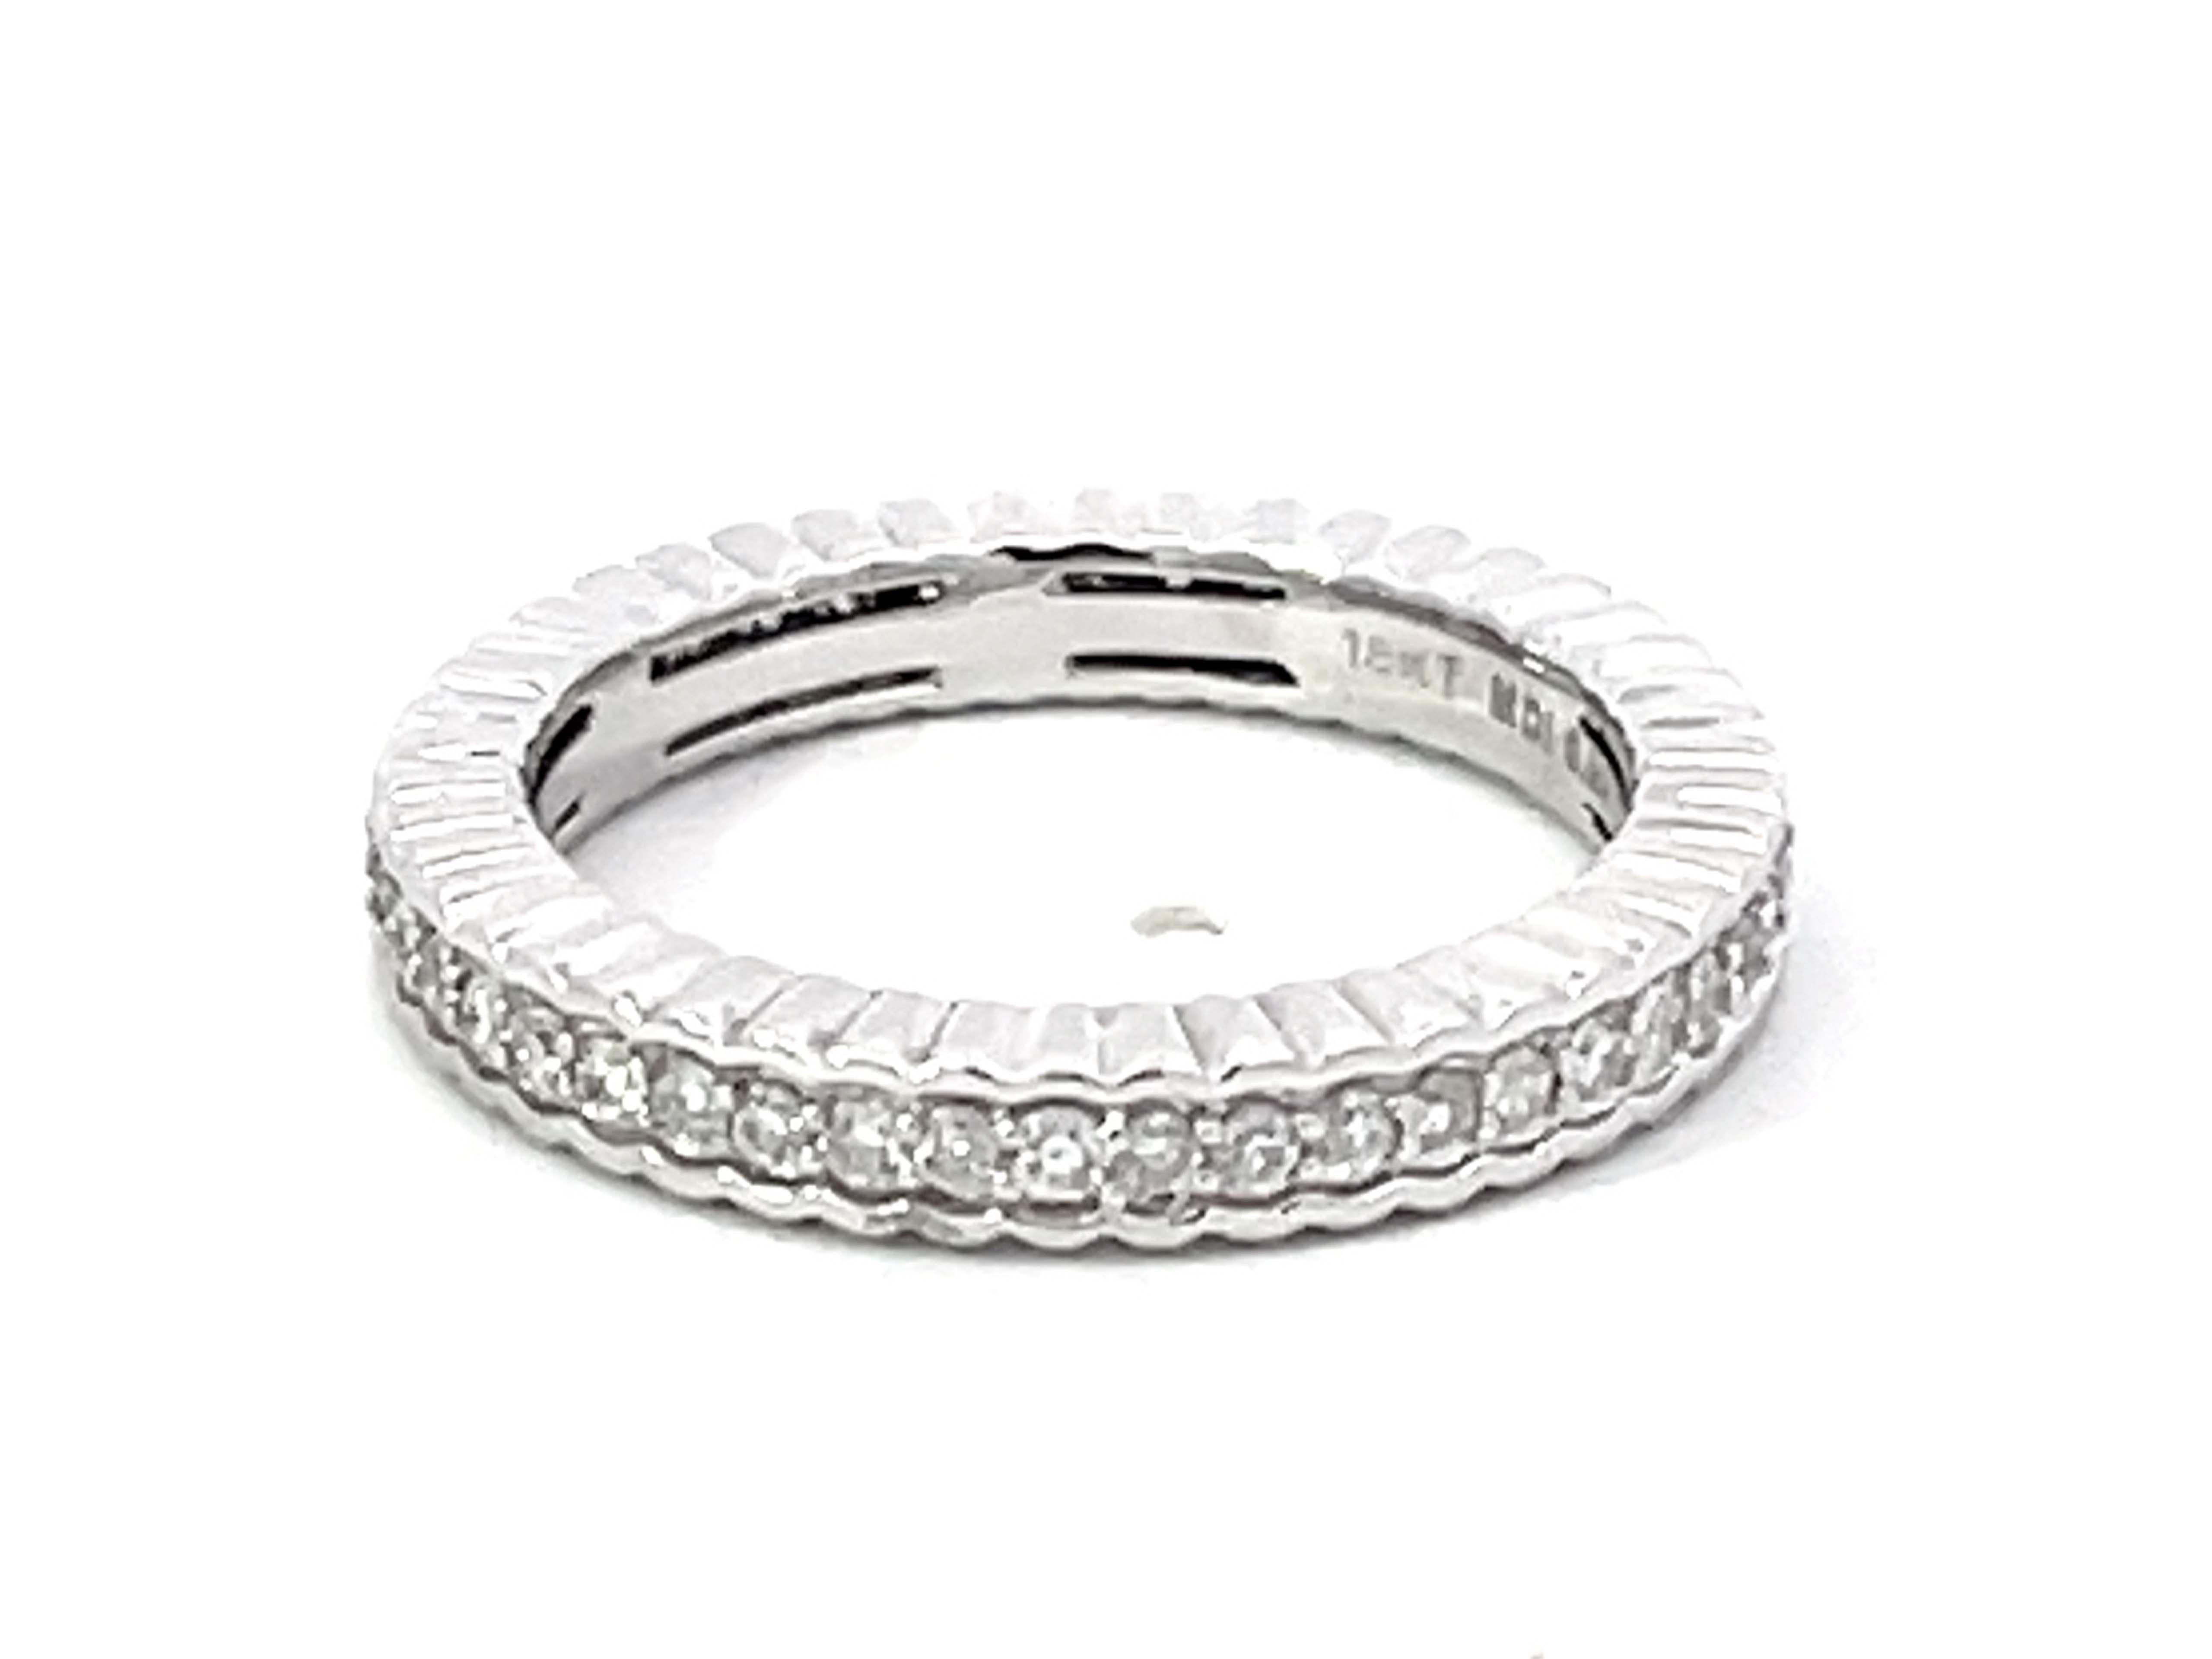 Eternity Brilliant Cut Diamond Band Ring Solid 18k White Gold In Excellent Condition For Sale In Honolulu, HI